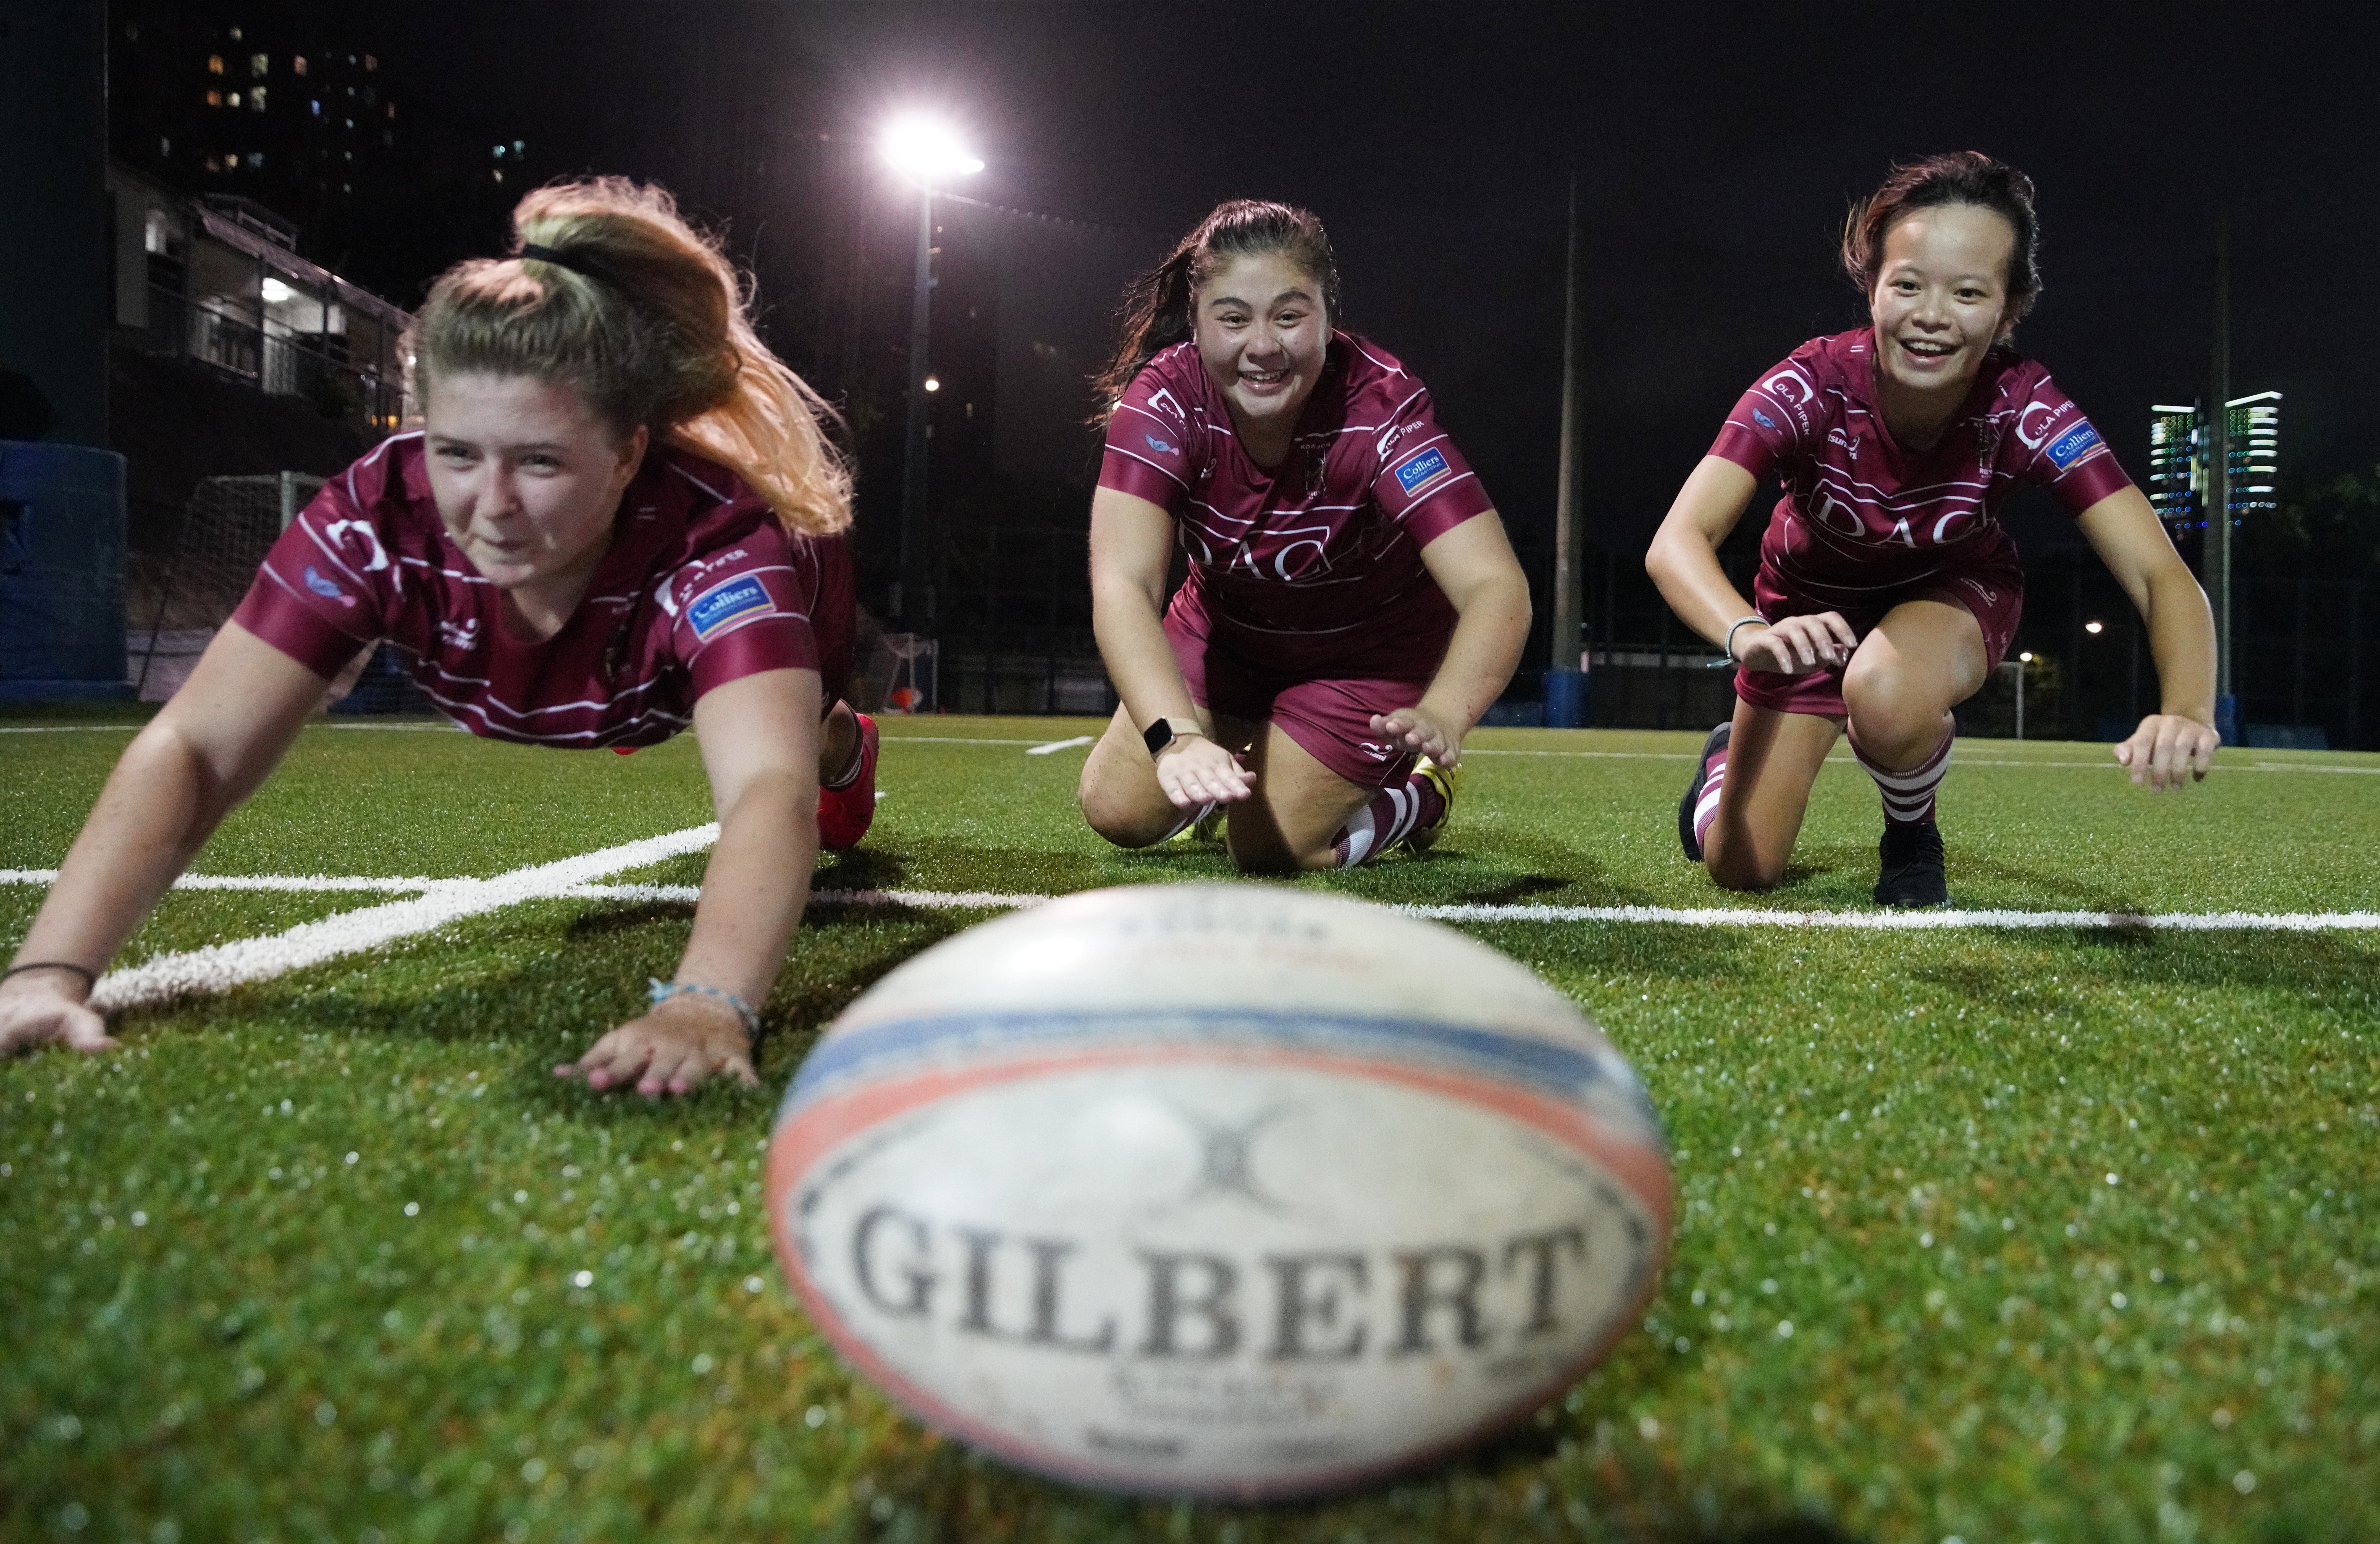 DAC Management LLC Kowloon Rugby Club premiership squad members Rosanna Down, Gabriela Przygodzki and Victoria Wong can’t wait for the season to start next month. Photo: Winson Wong